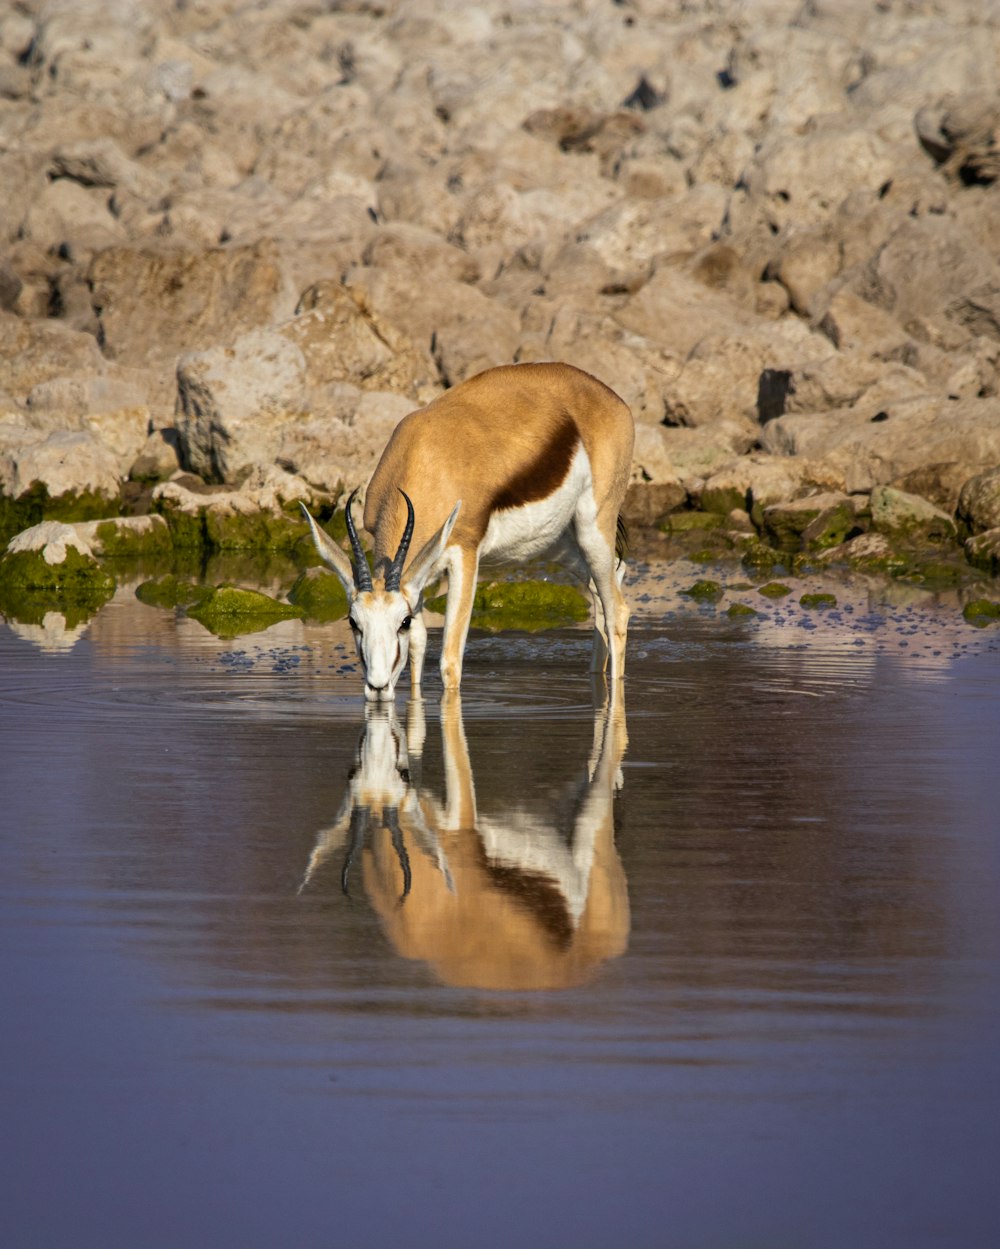 a gazelle drinking water from a body of water